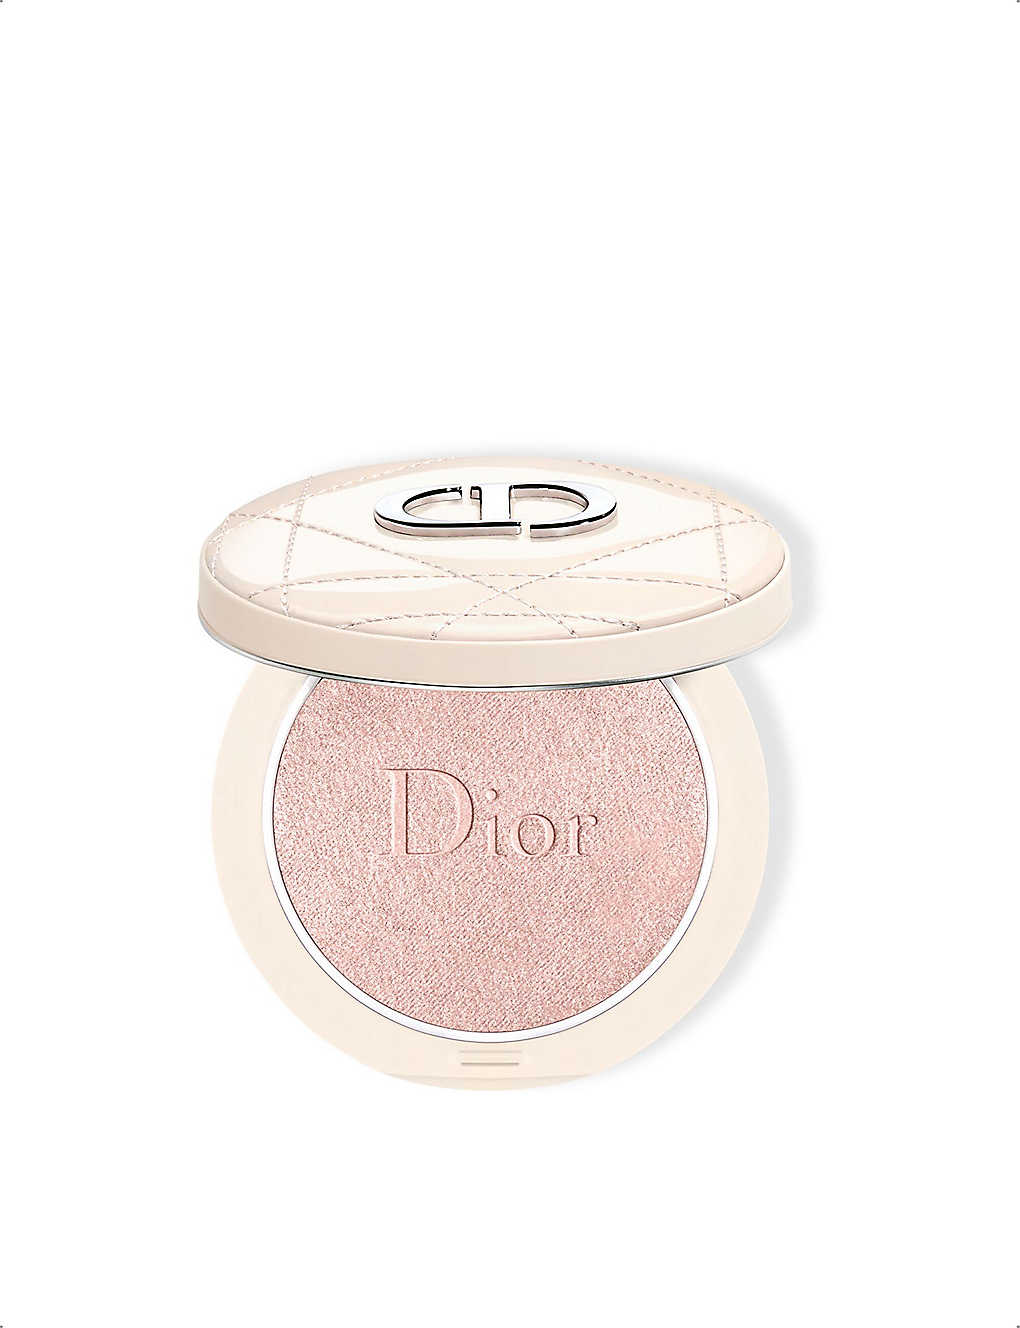 Dior Forever Couture Luminizer Longwear Highlighting Powder 6g In 002